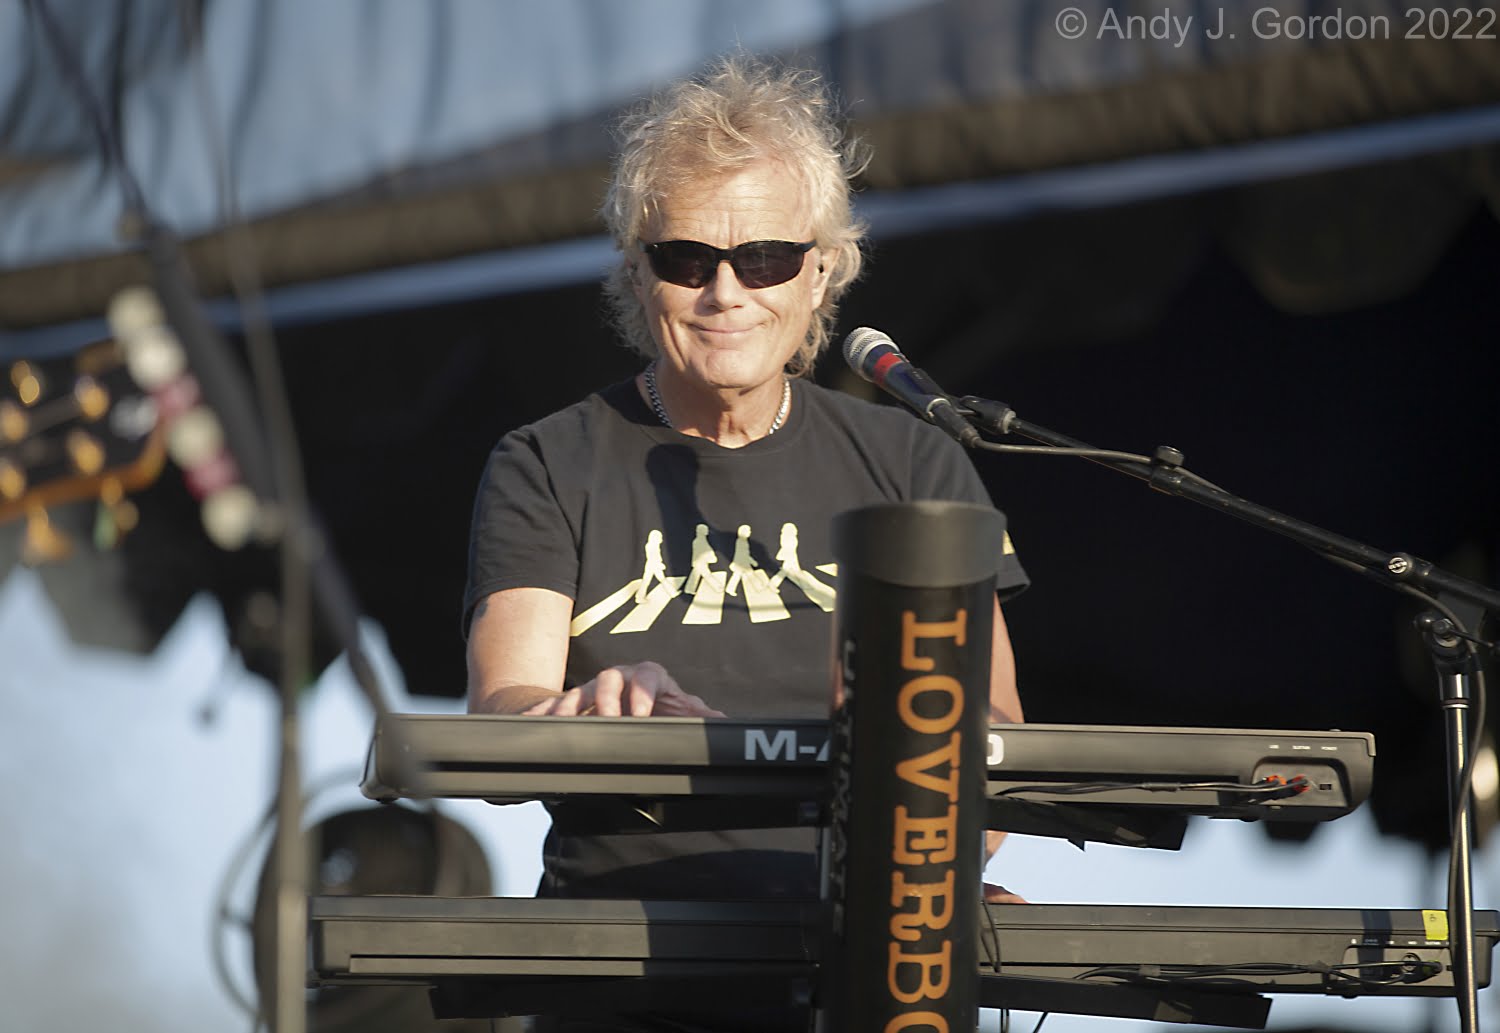 loverboy tour review